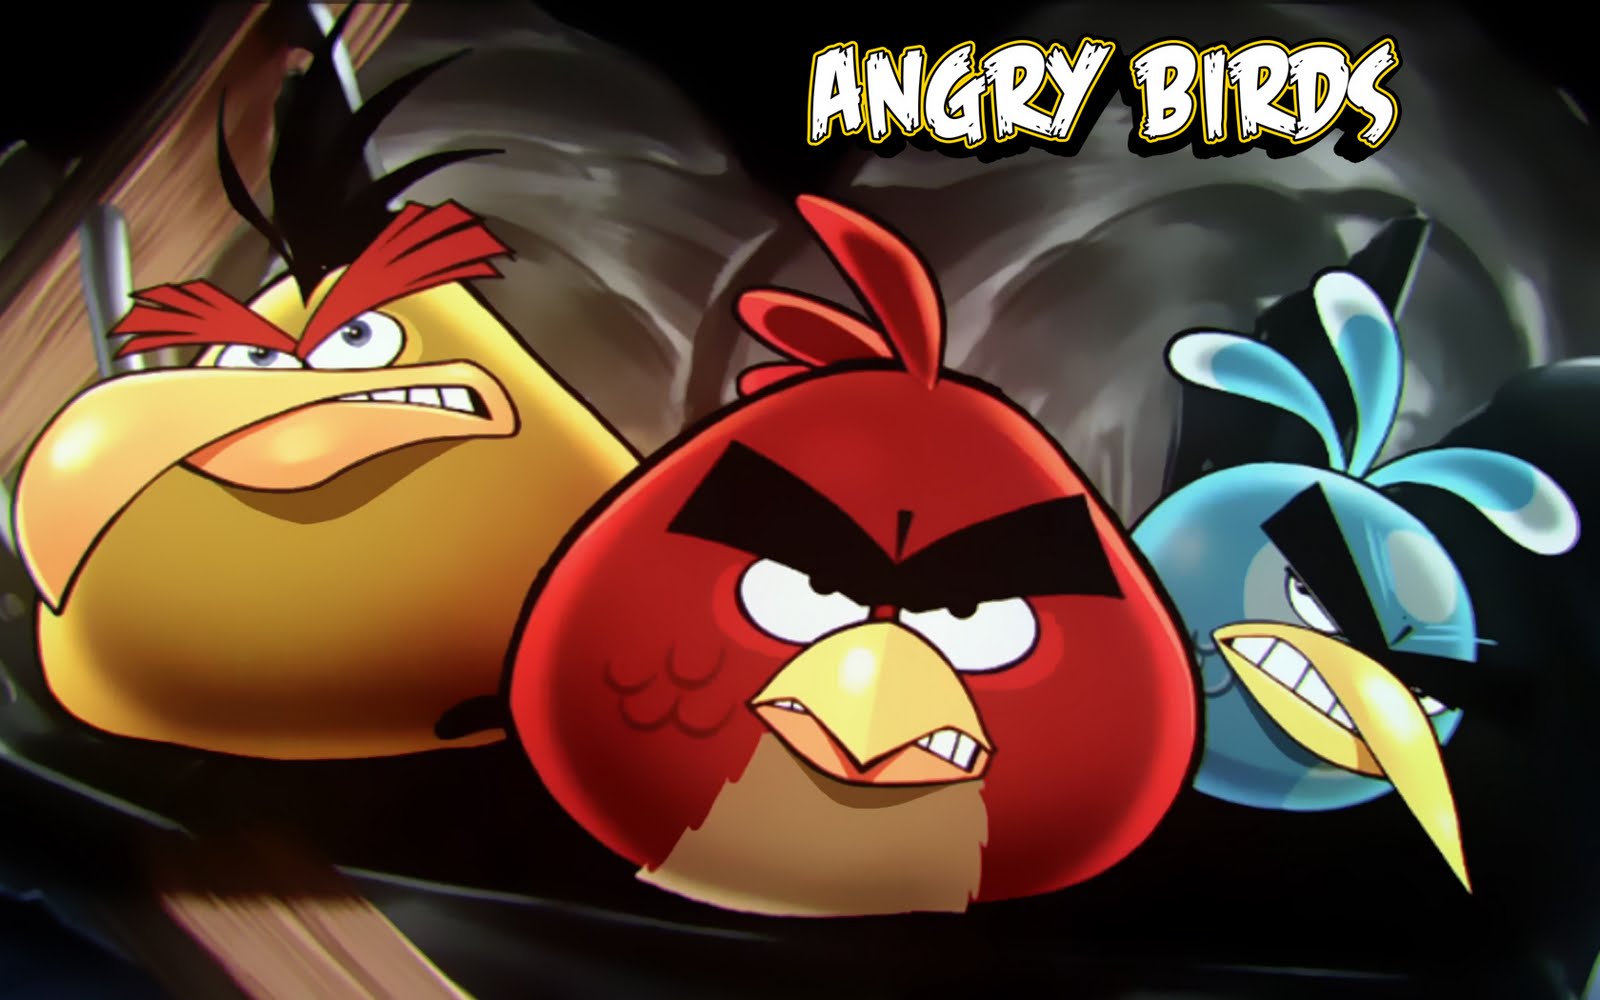 angry birds cute hd wallpapers angry birds cute hd wallpapers